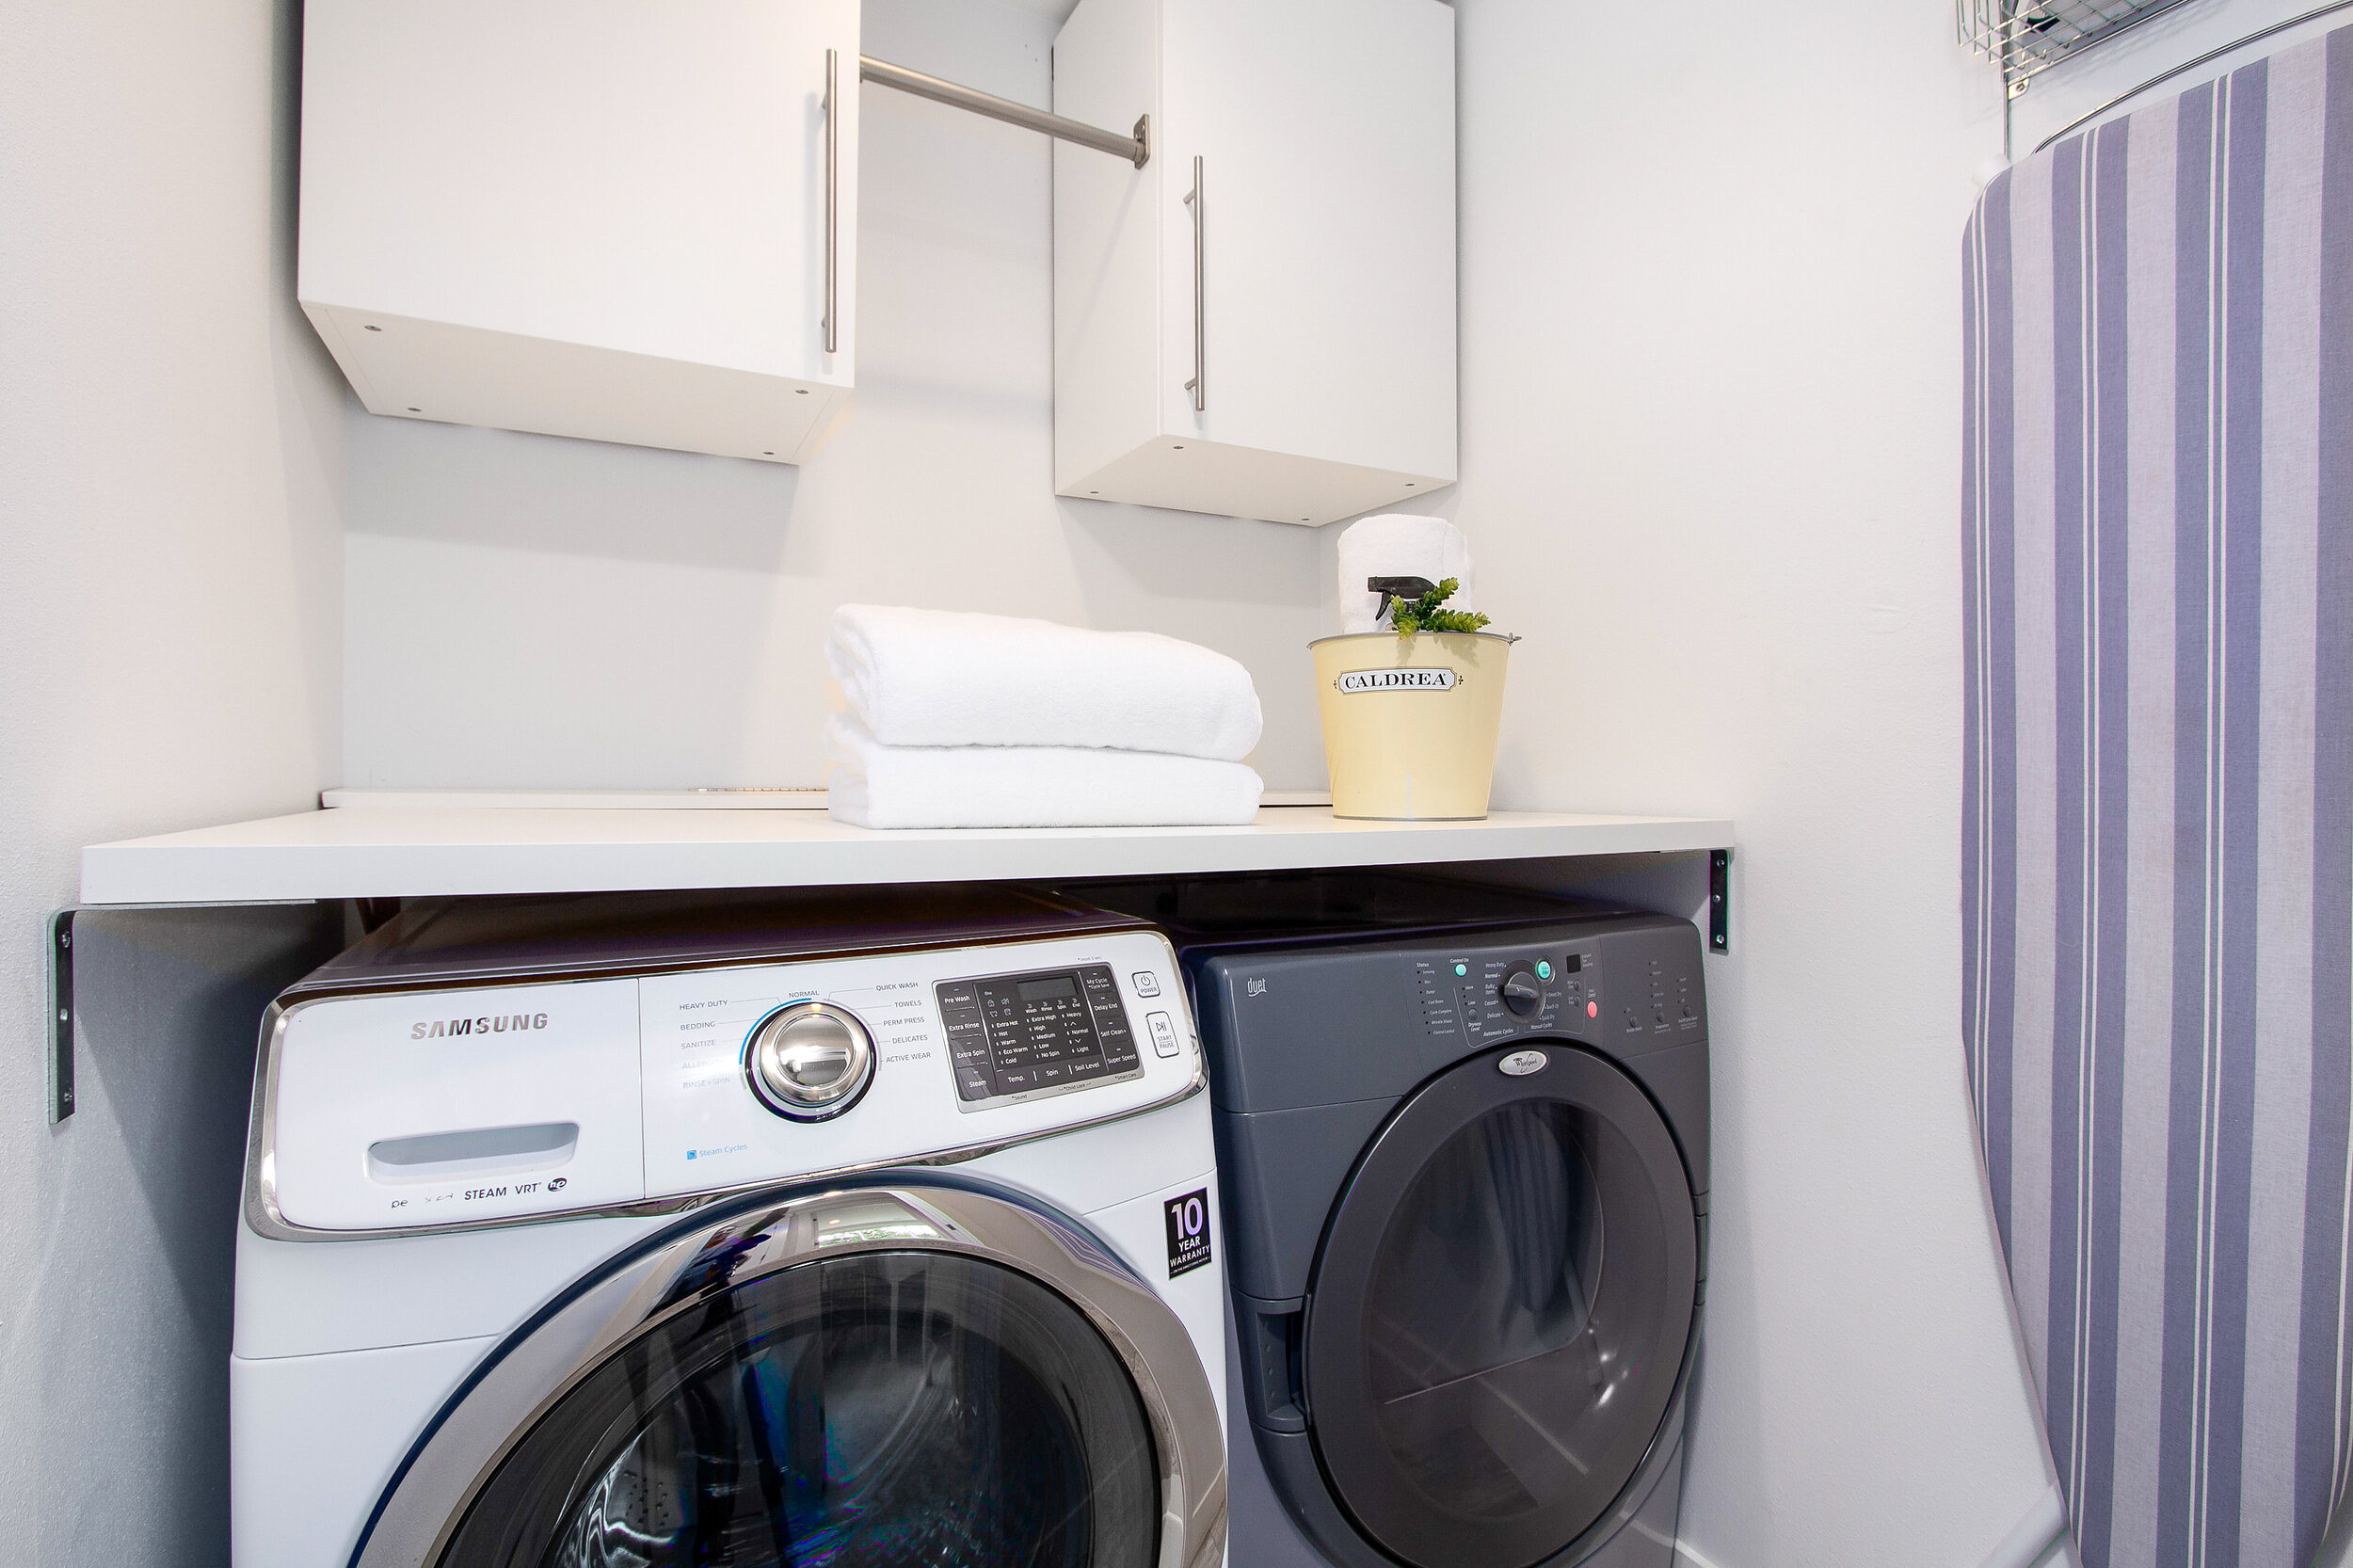  Enjoy a laundry room, conveniently located upstairs alongside the bedrooms.&nbsp; 